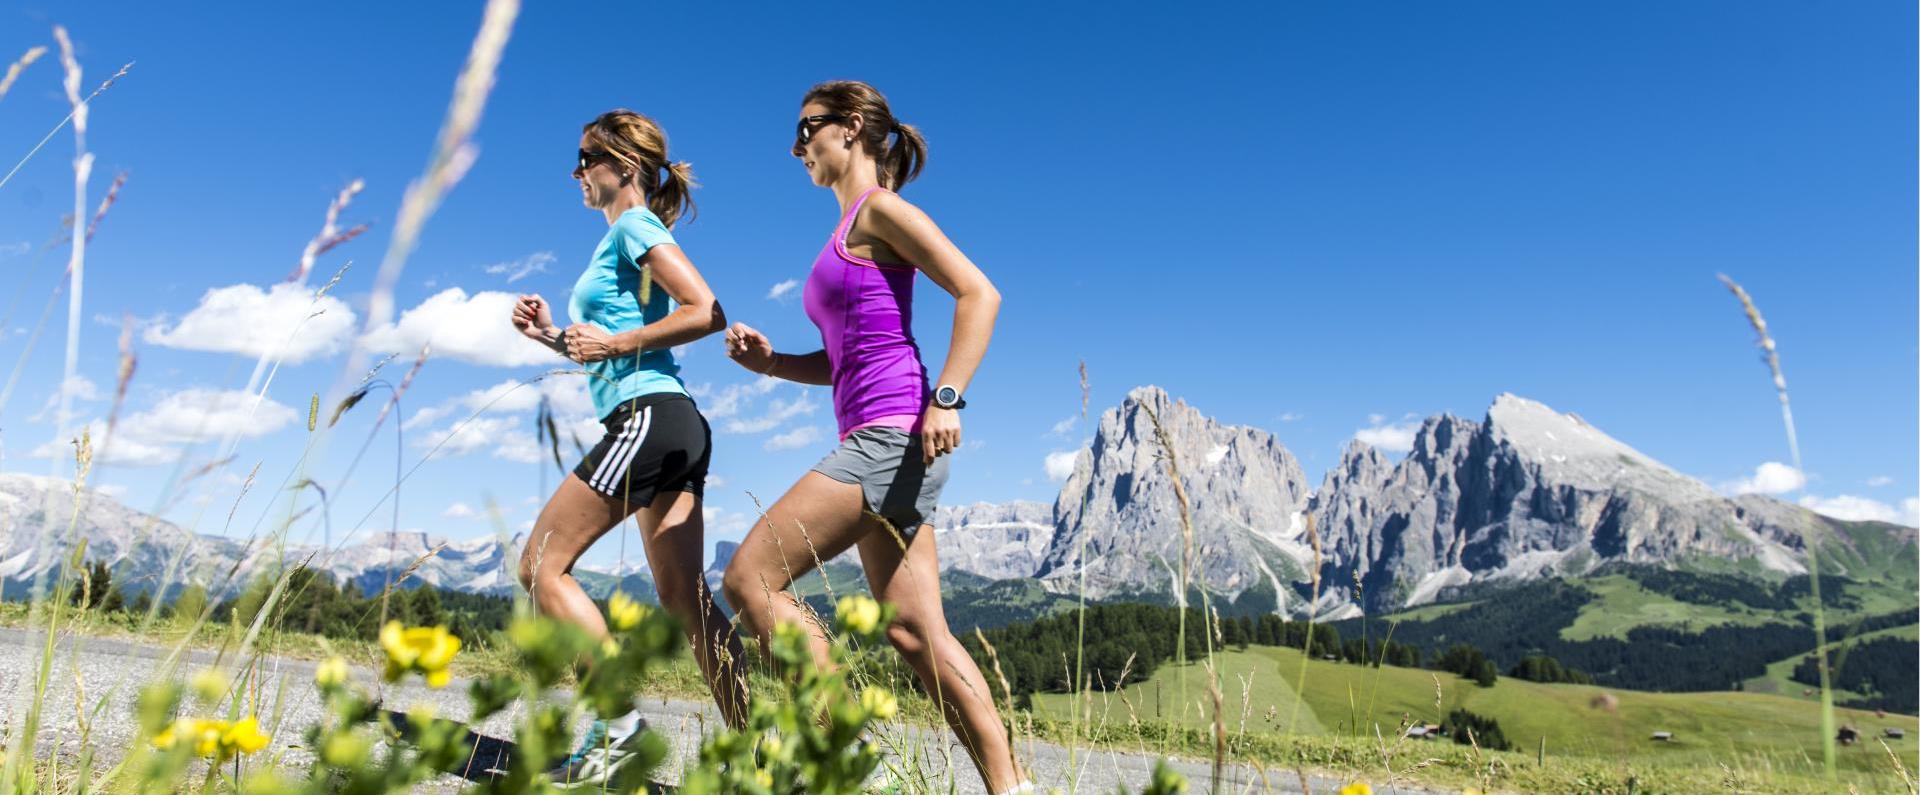 Jogging in the Running Park Seiser Alm in the heart of the Dolomites